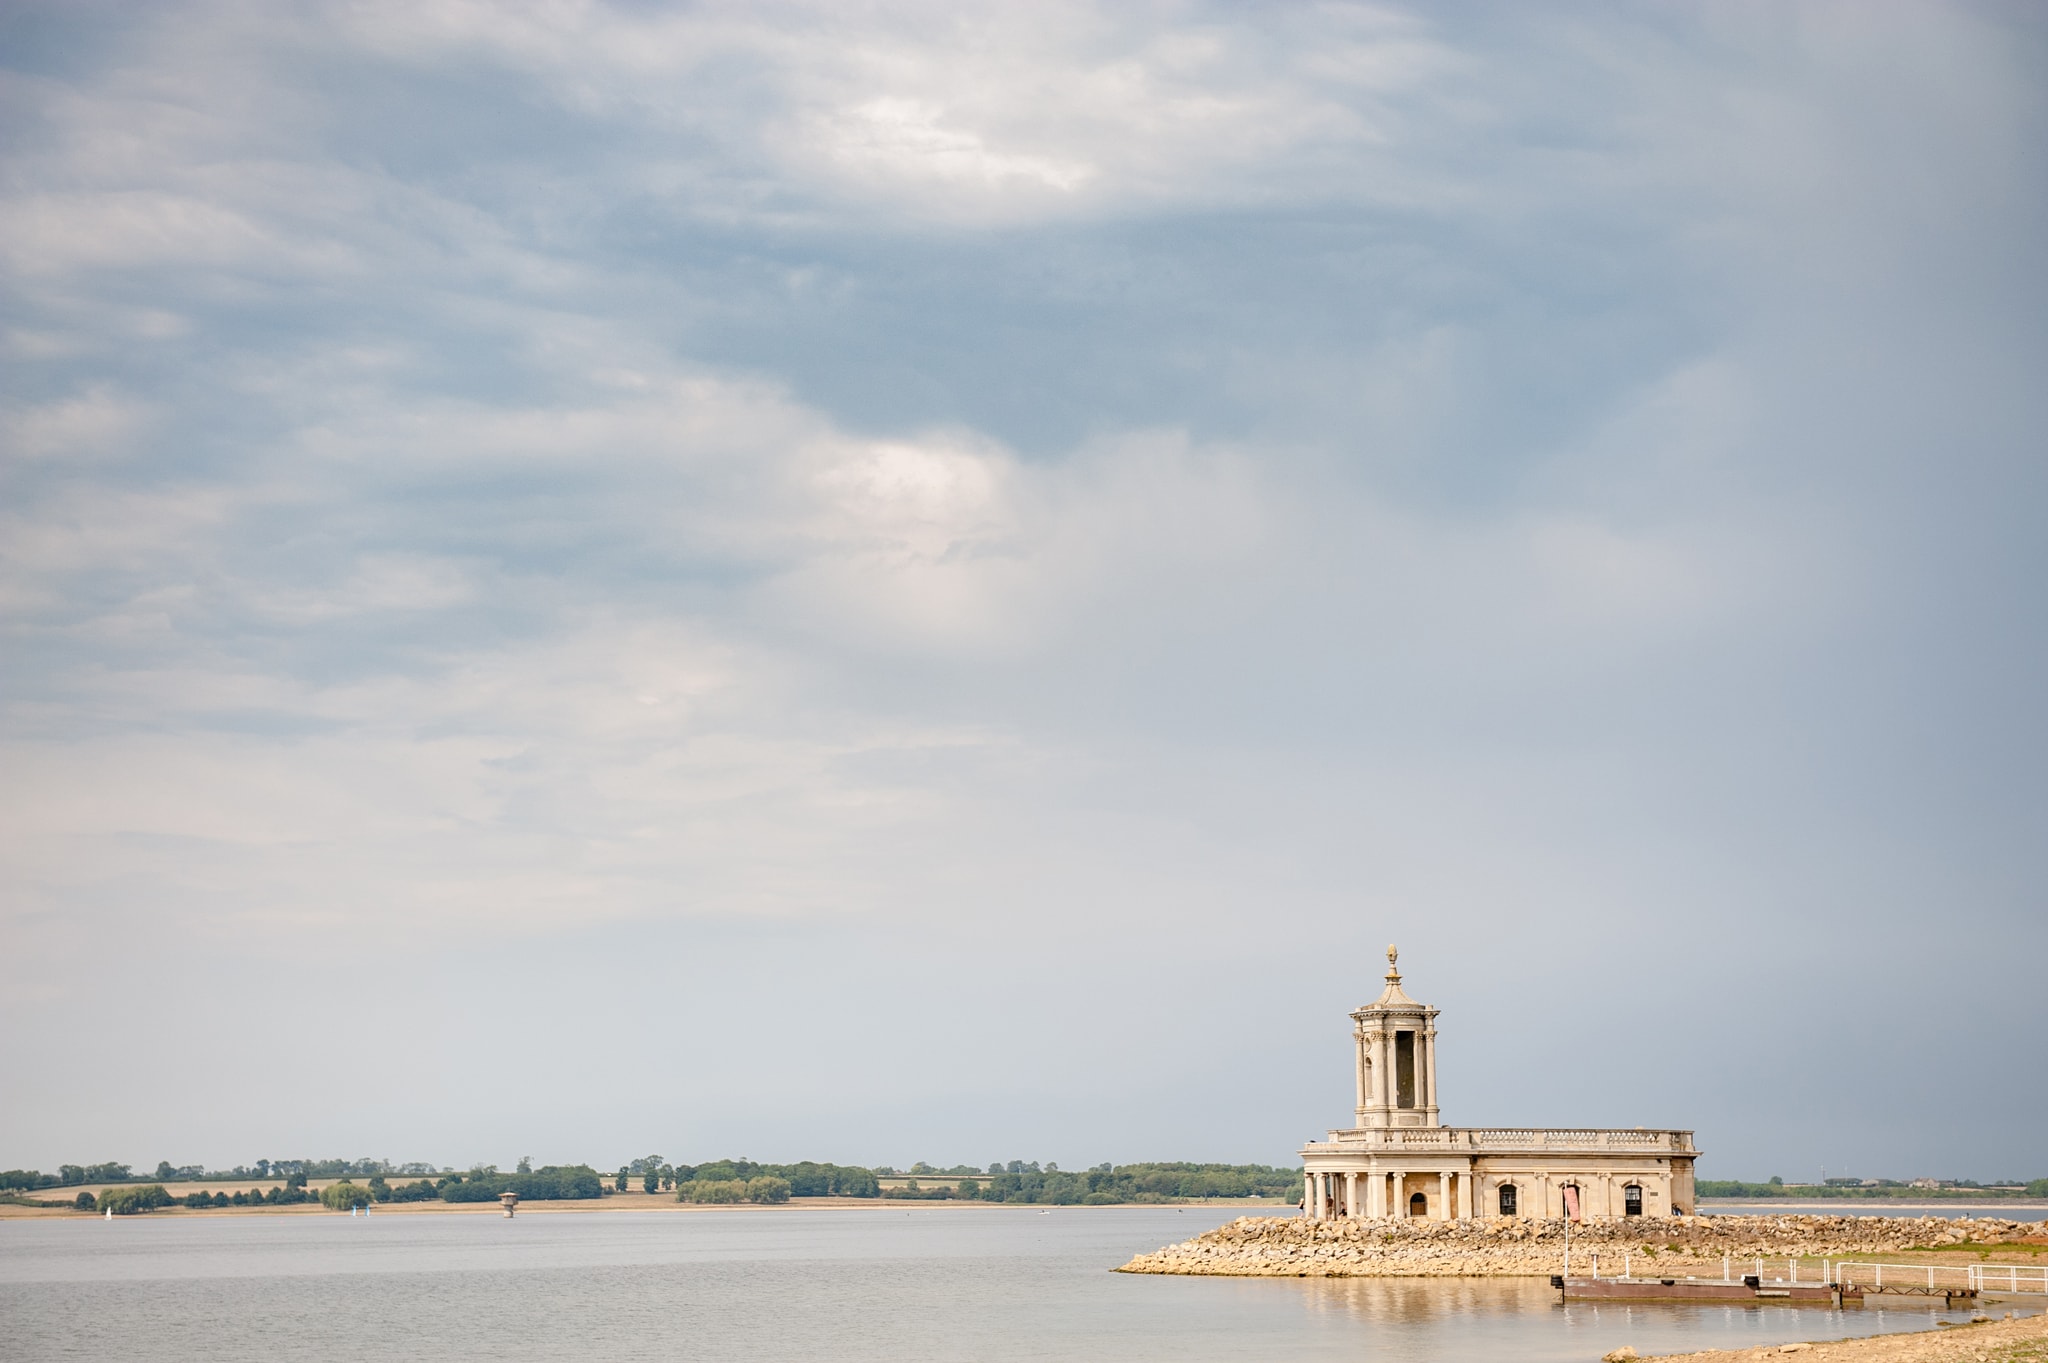 View of Normanton church and Rutland water on a cloudy day